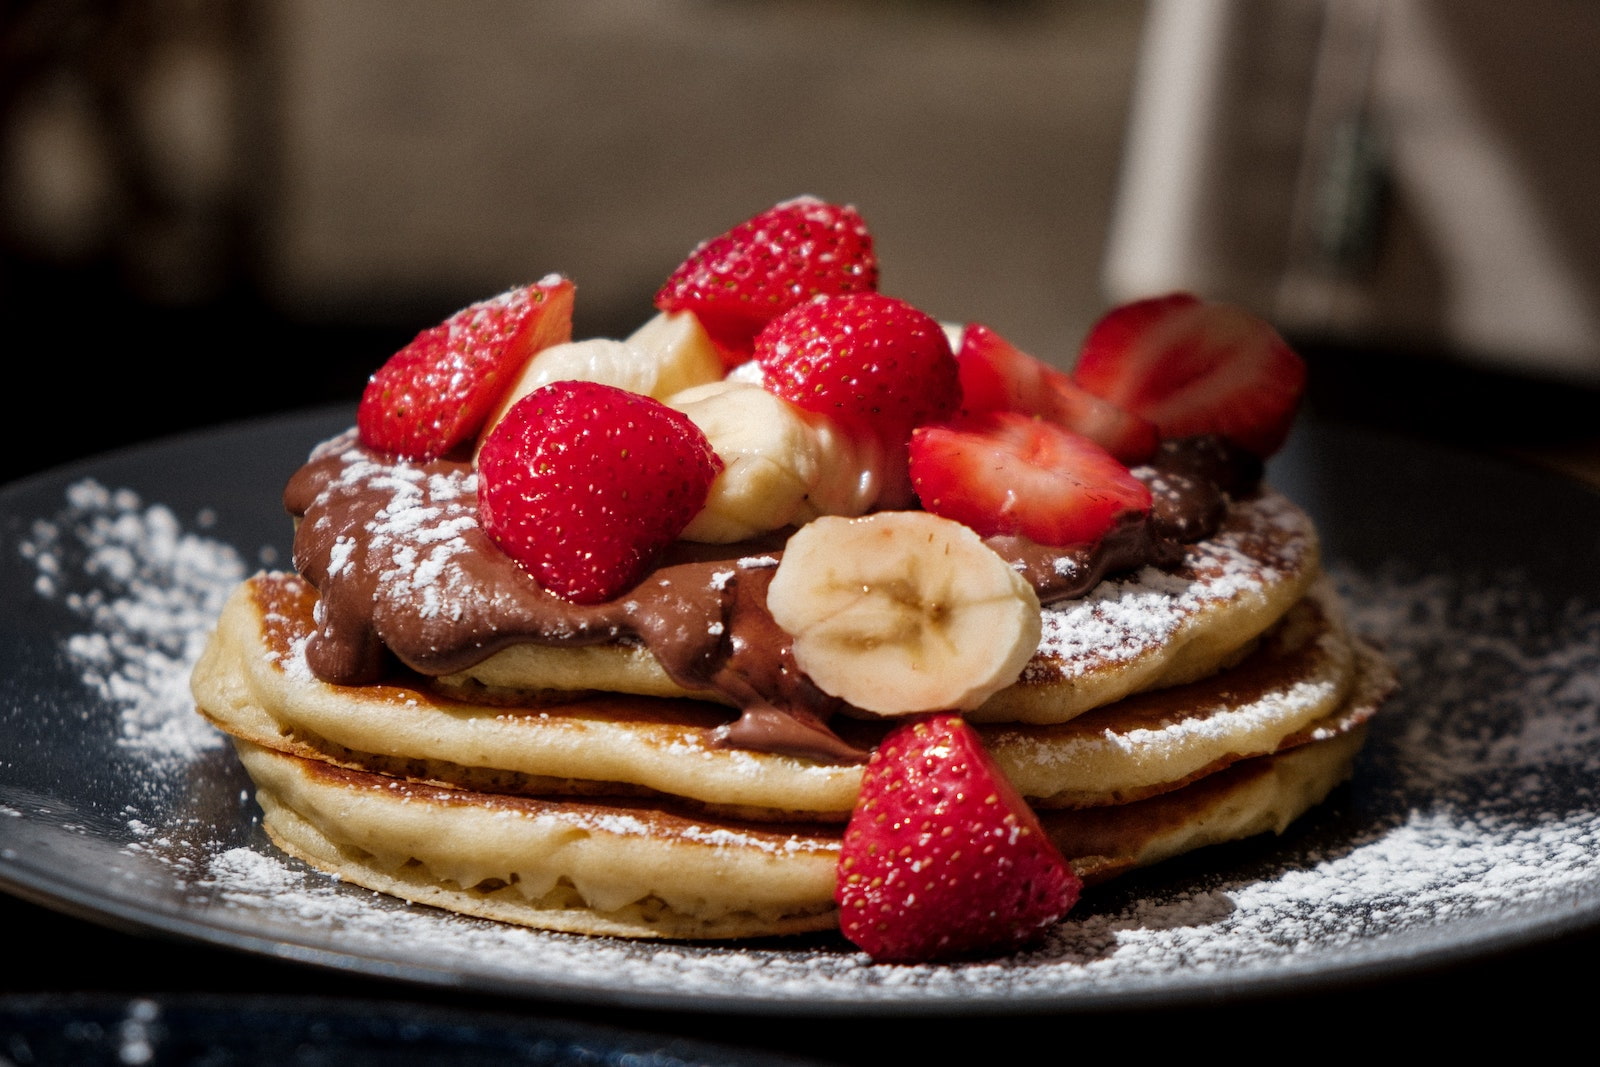 Go mad for pancakes and win free food at The Breakfast Club